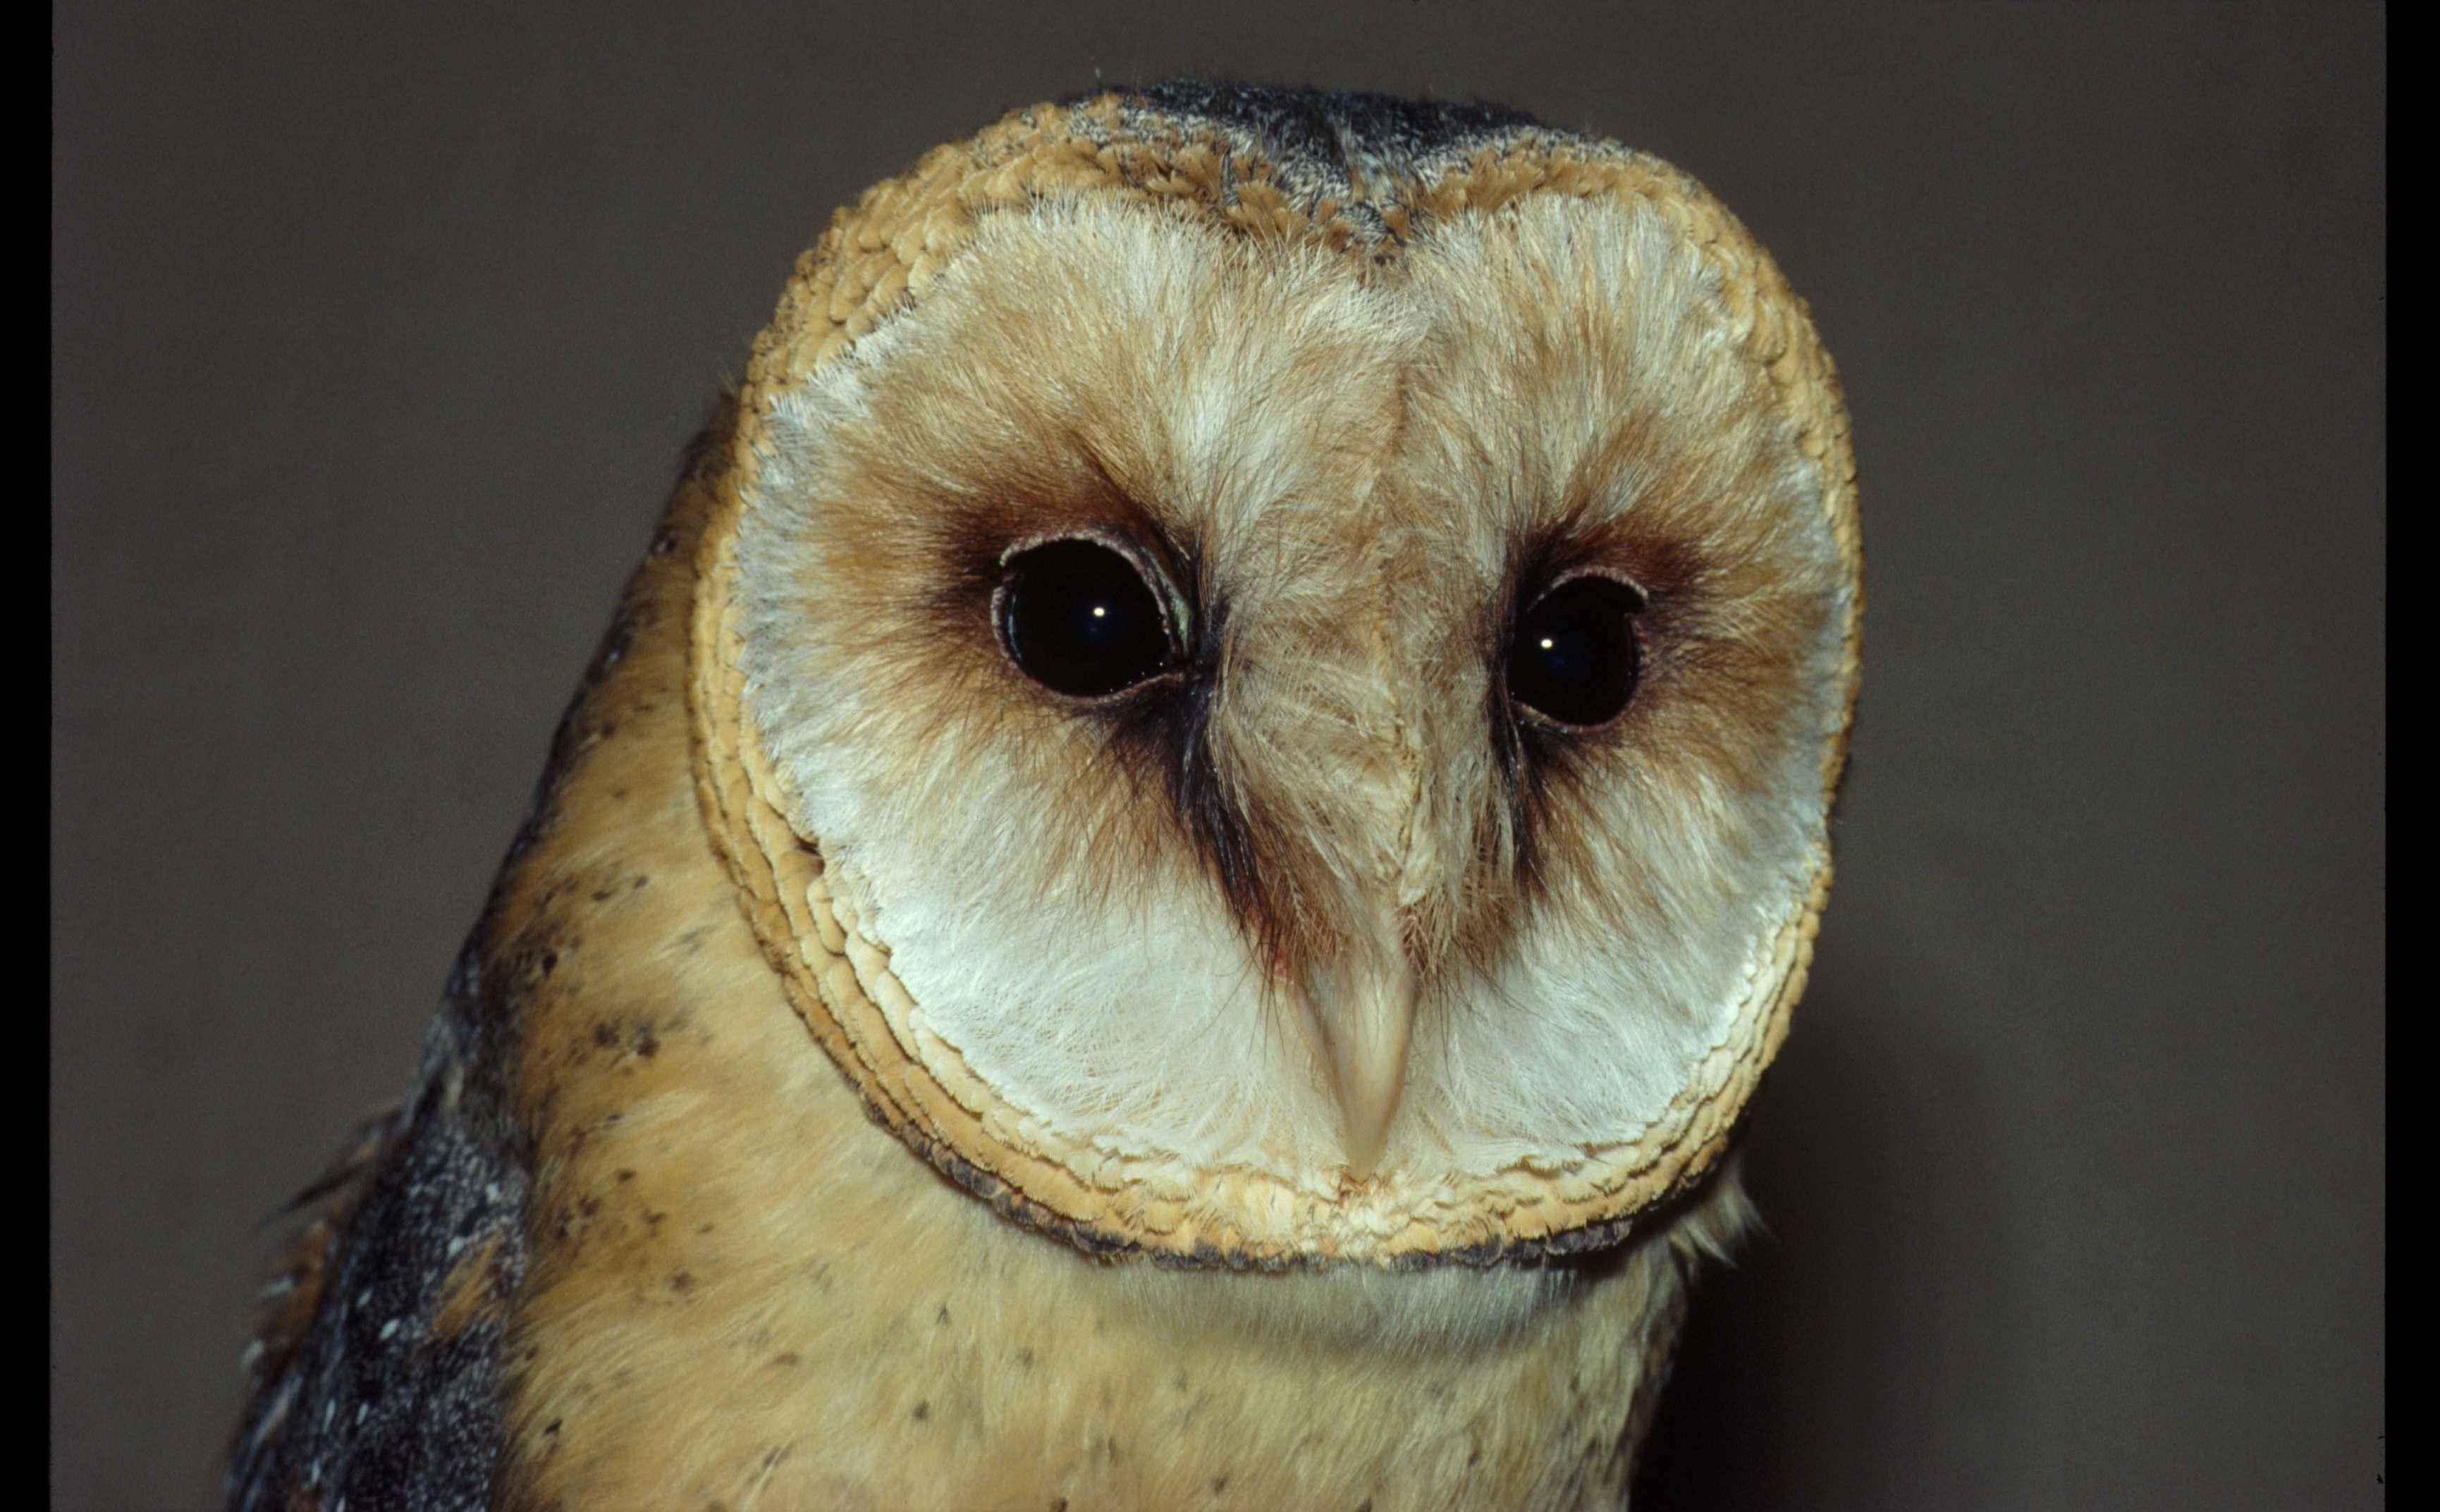 Elderly barn owls do not become hard of hearing as they age. Credit: Group Animal Physiology and Behaviour, Oldenburg University